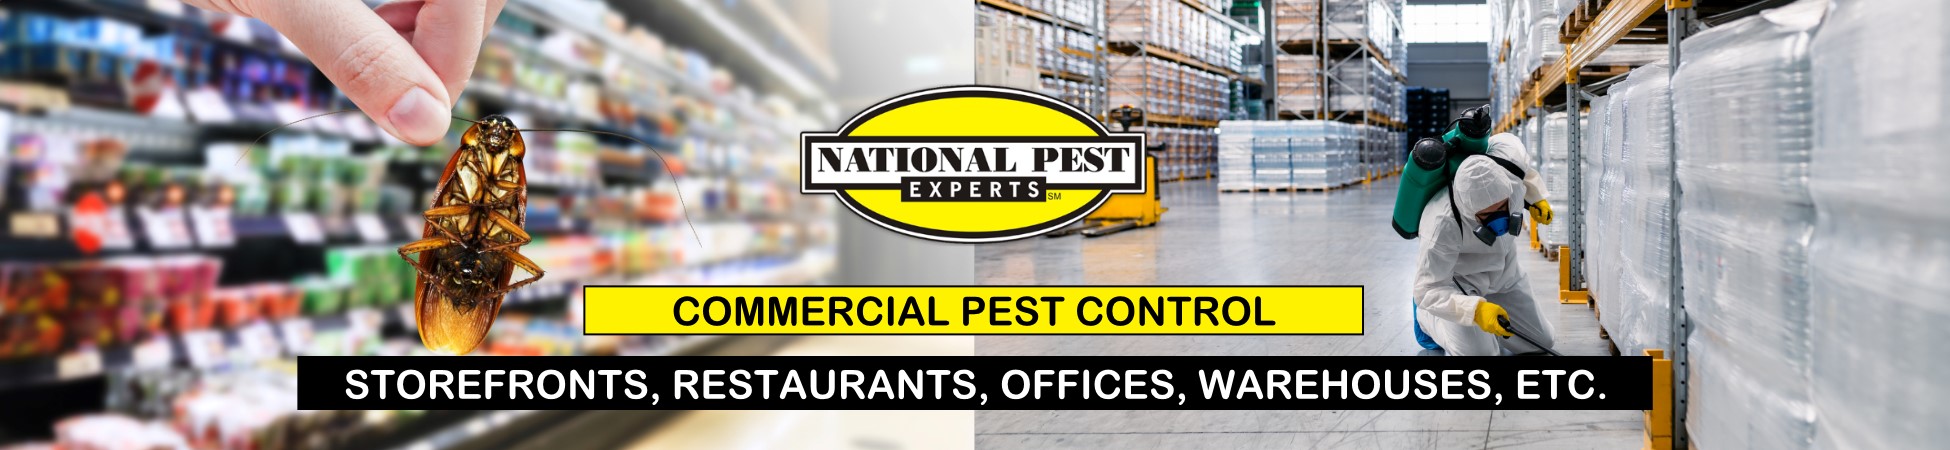 National Pest Experts - Commercial & Industrial exterminating and pest control in Greenlawn, NY